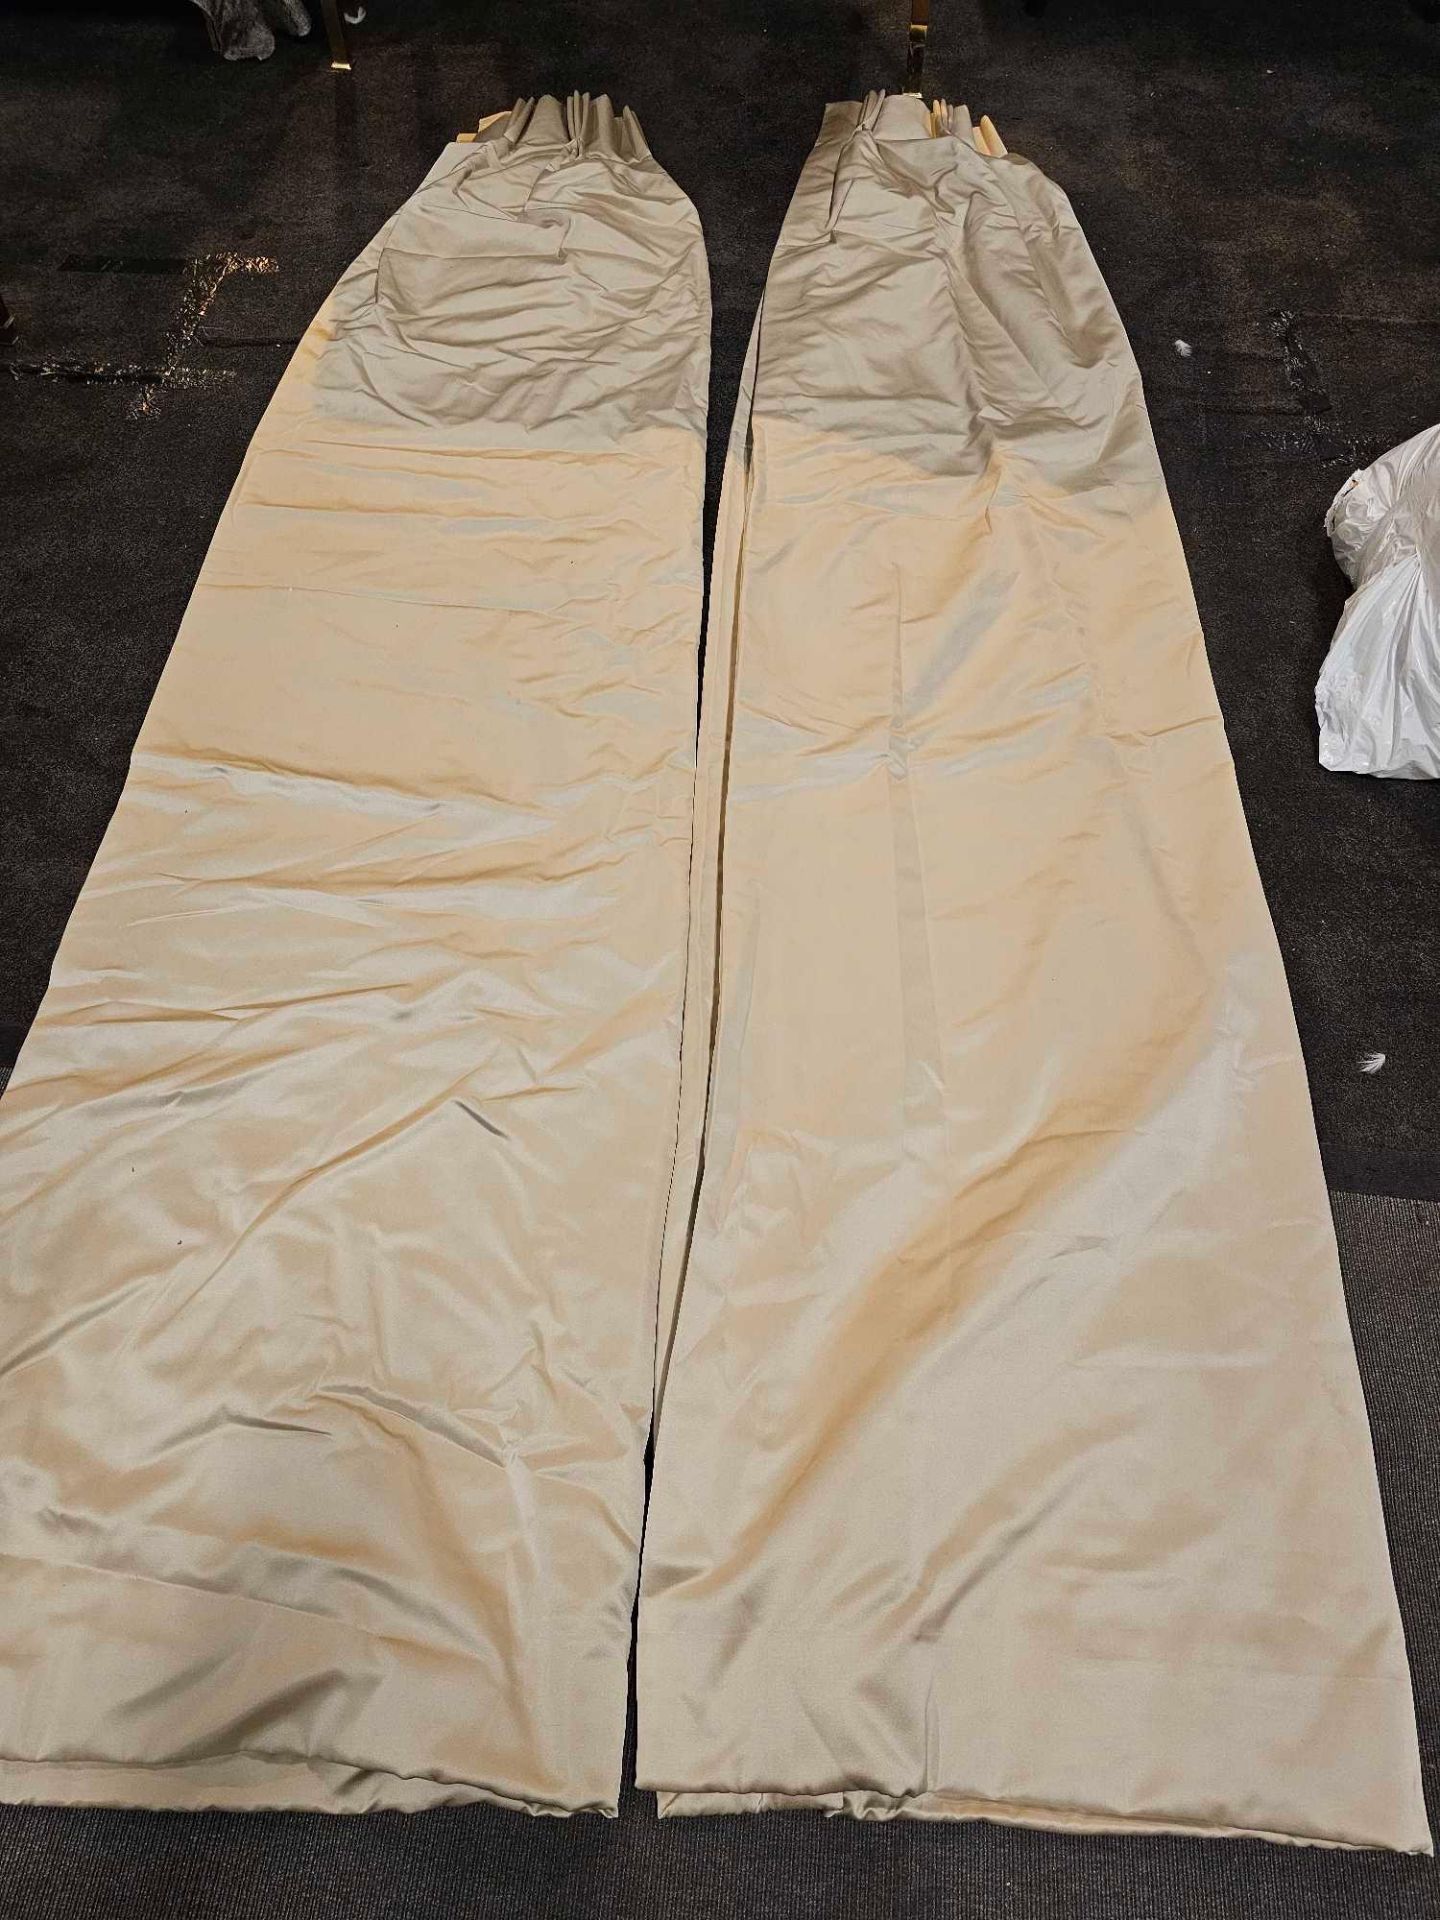 A Pair of Silk Gold Drapes Pencil Pleat Top Fully Lined 130 x 265 (Ref : Dorch D200)